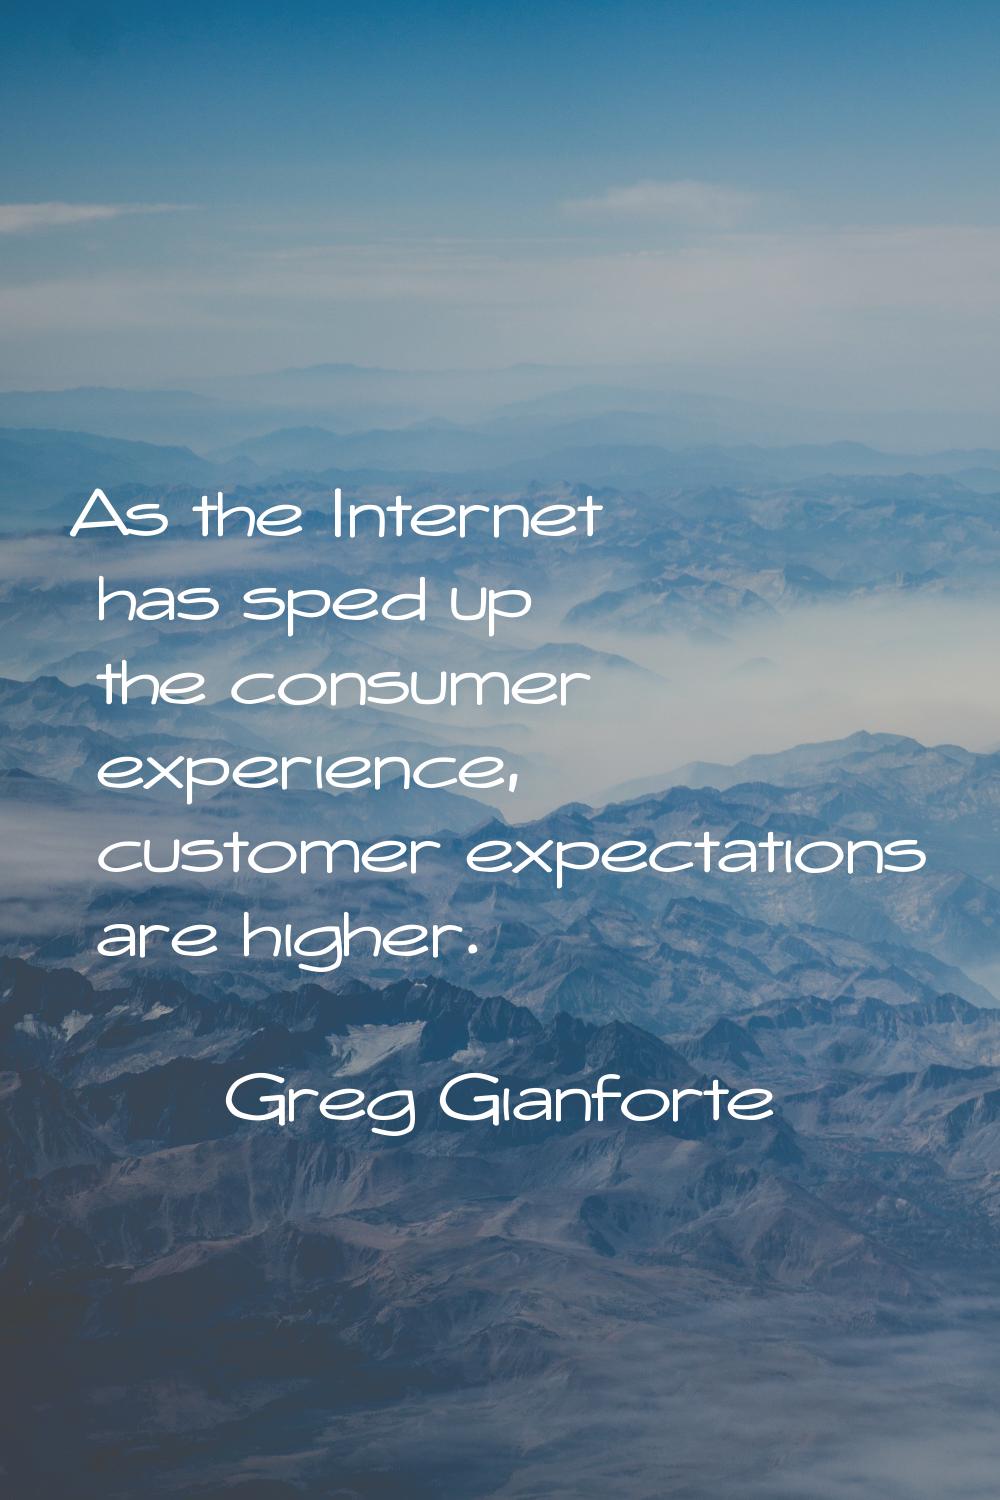 As the Internet has sped up the consumer experience, customer expectations are higher.